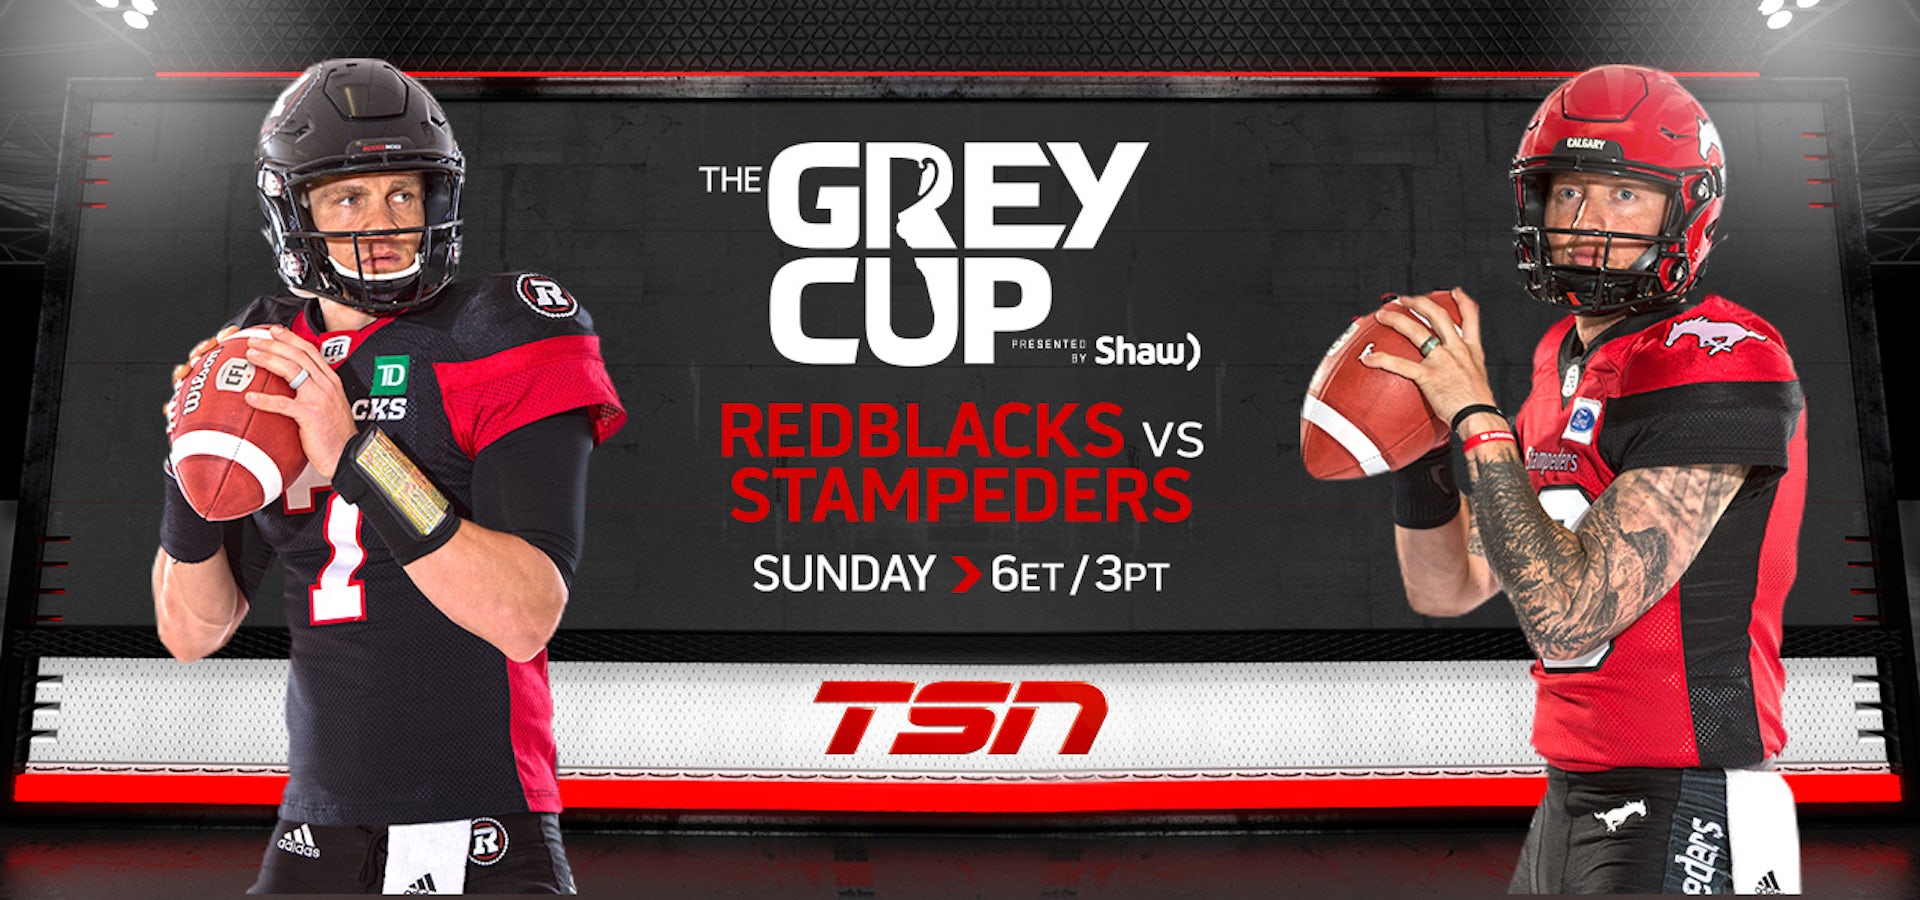 TSN’s GREY CUP RADIO NETWORK Presented by Mark’s Returns to Airwaves